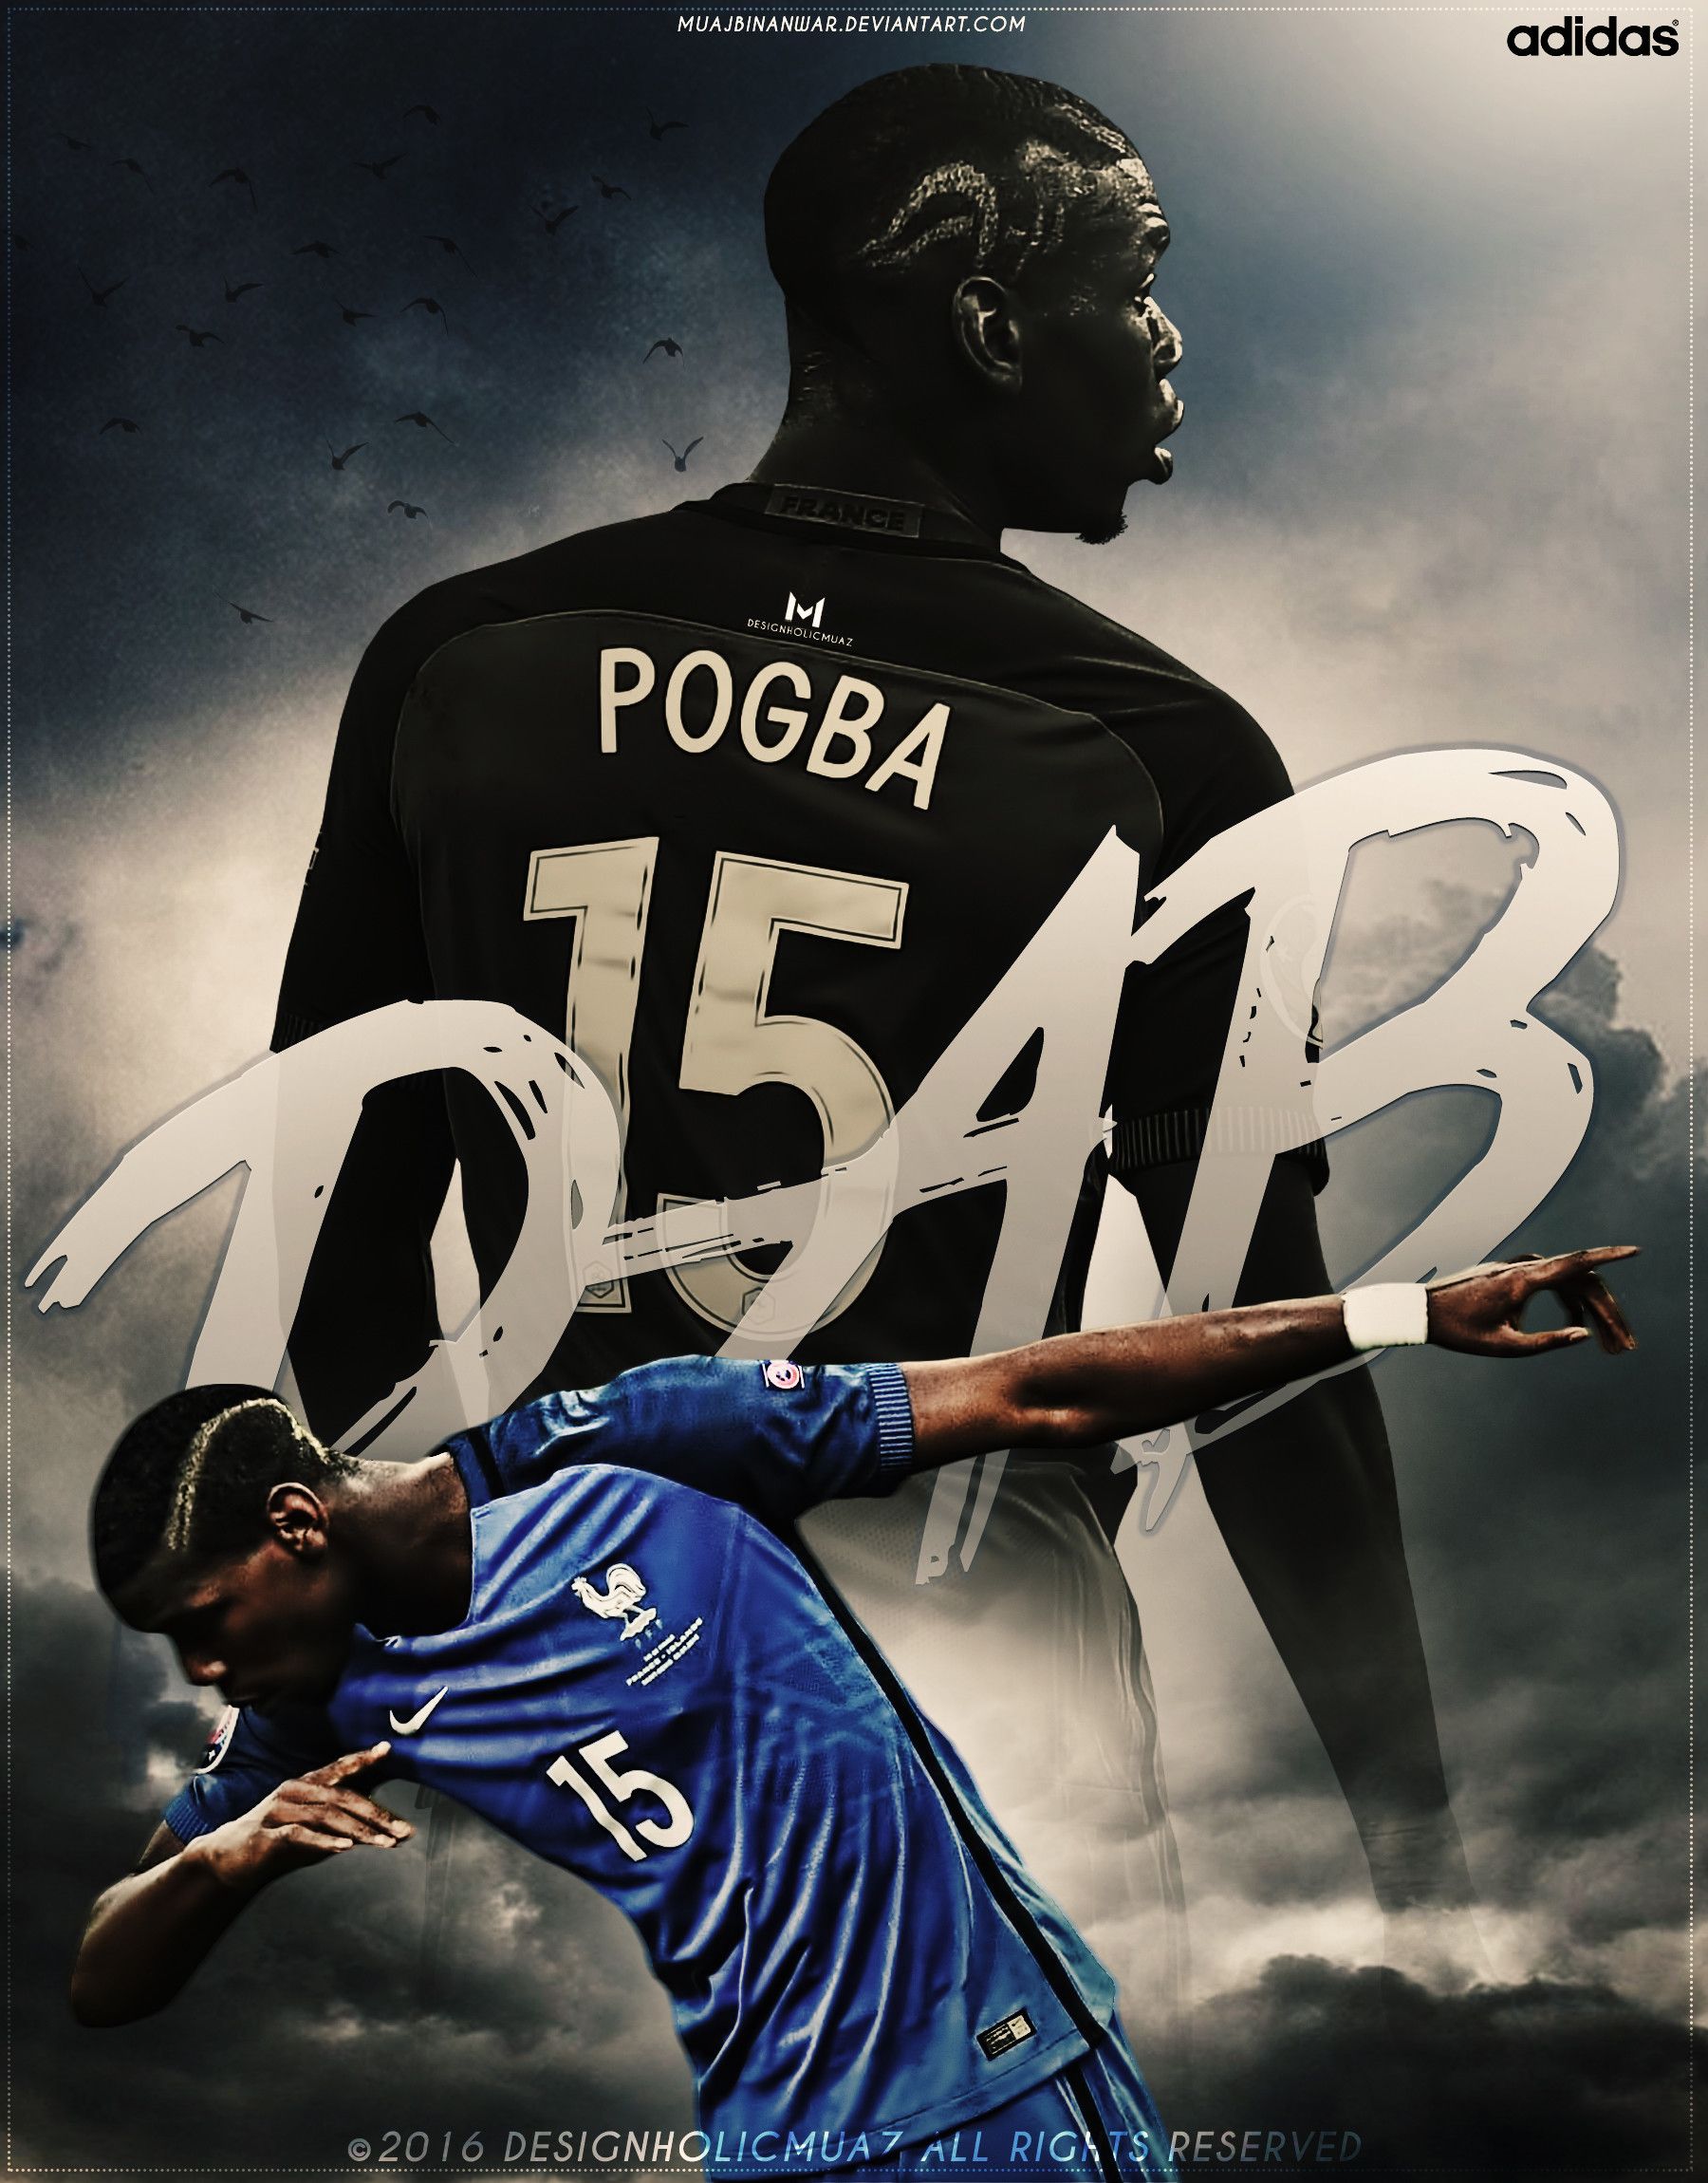 Pogba Dab Wallpaper. Paul pogba, Manchester united team, Manchester united players